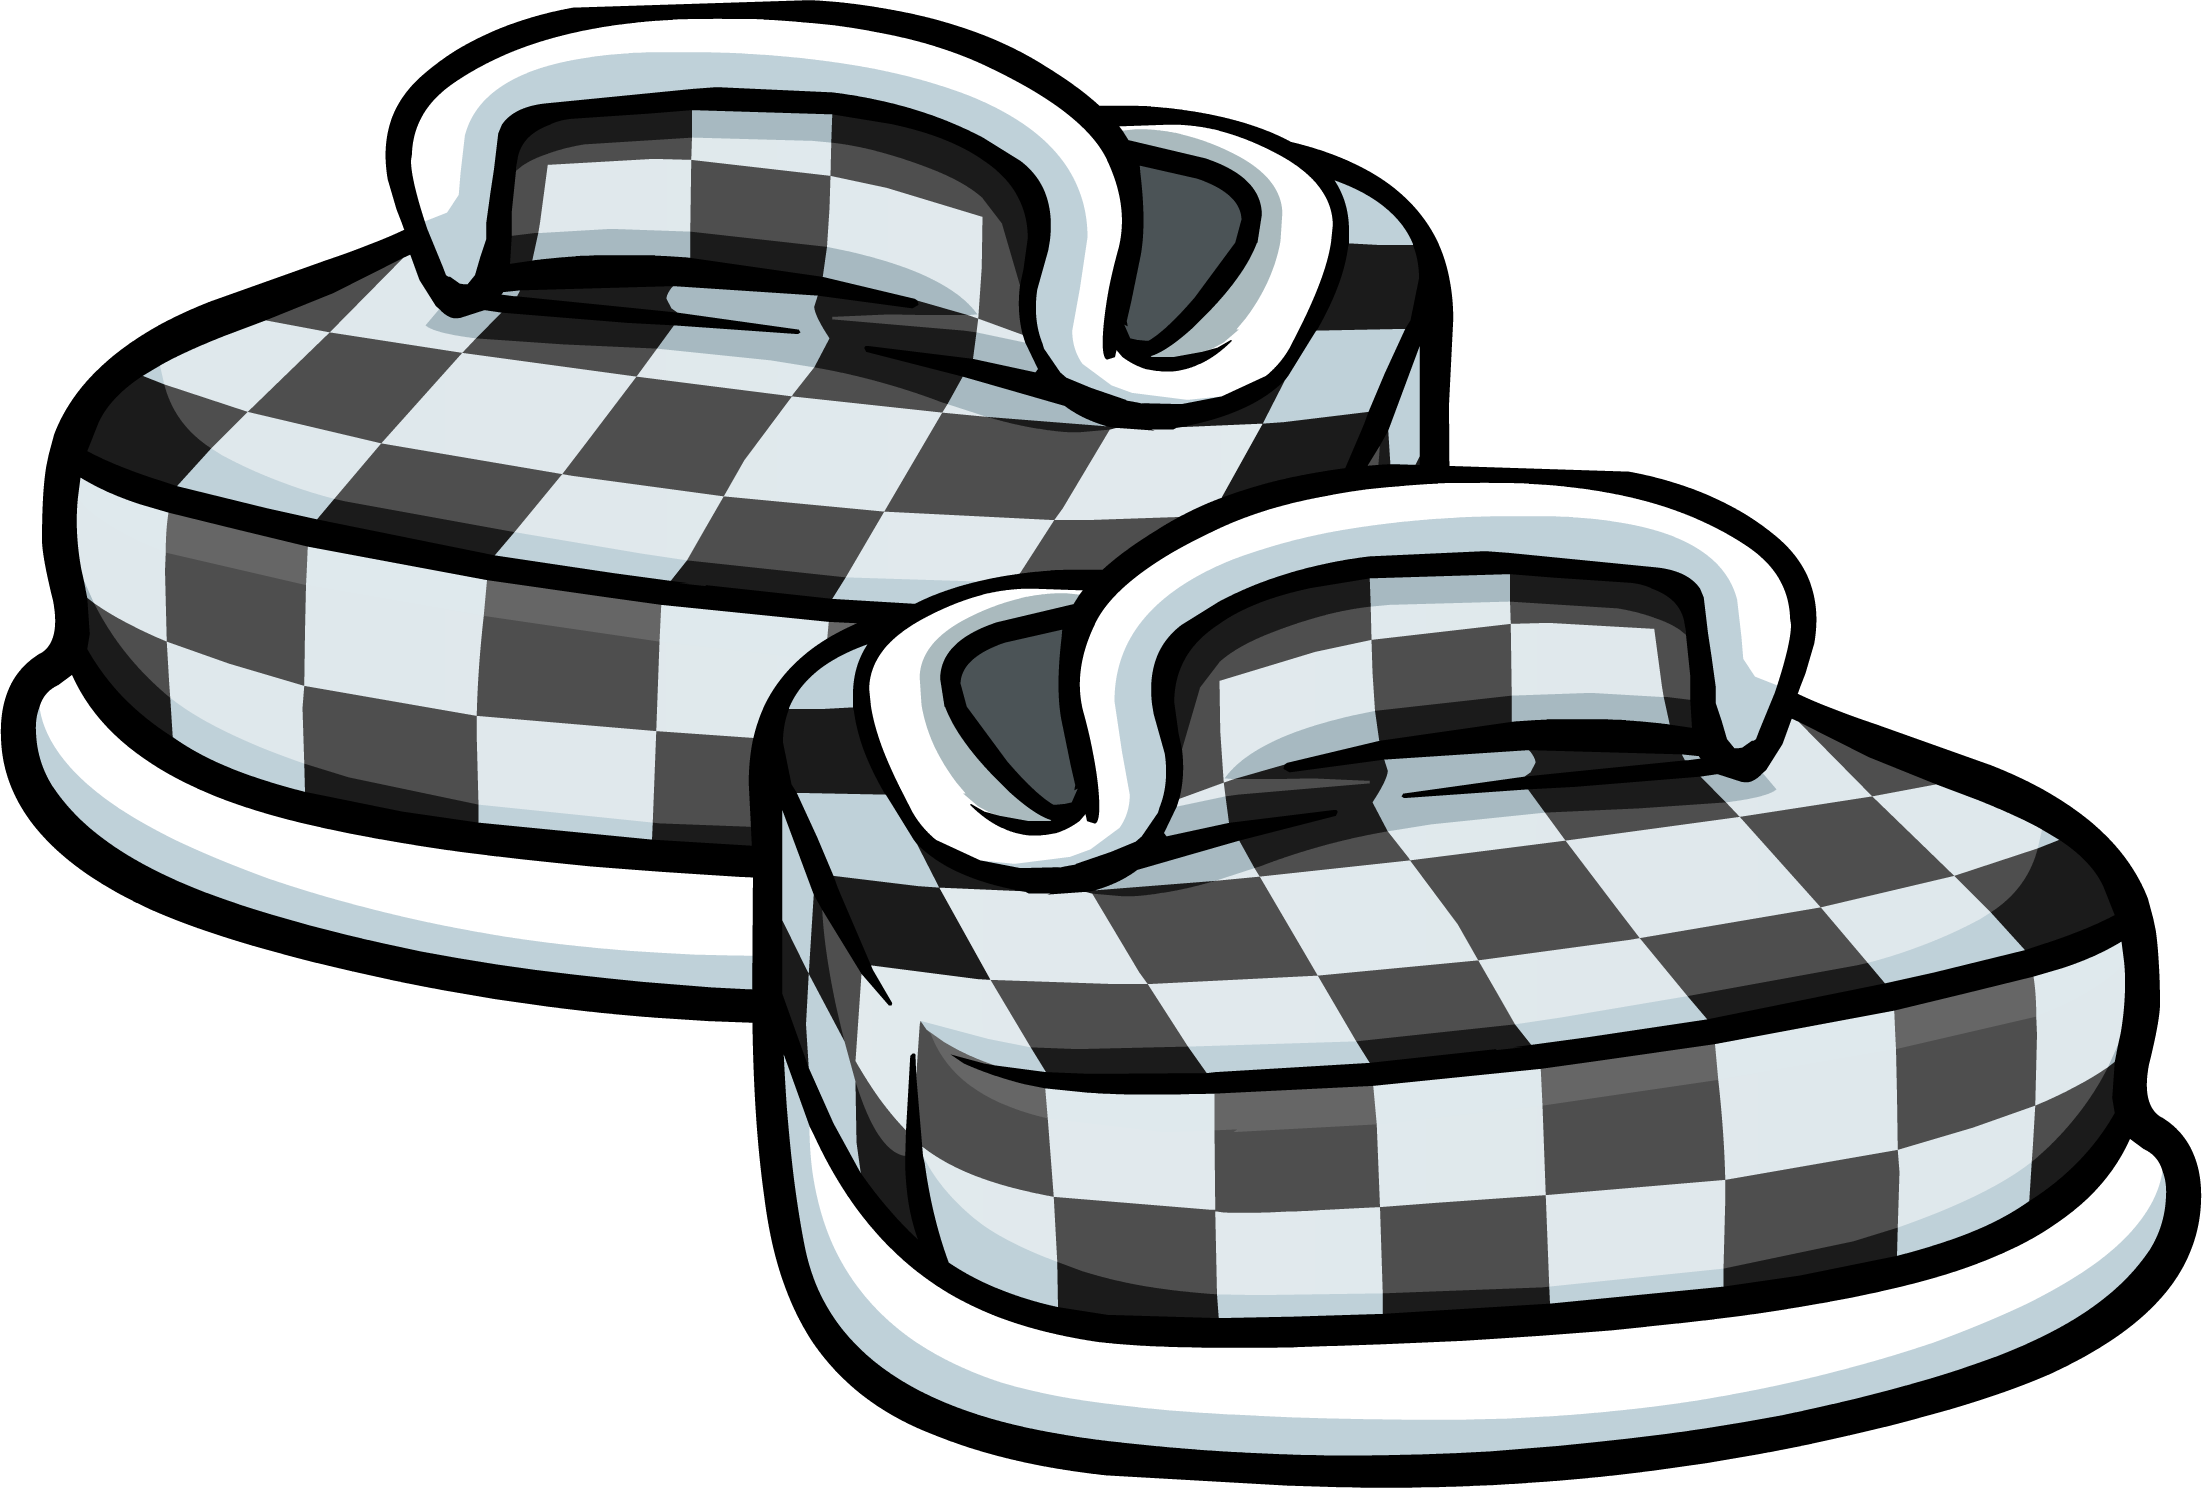 Black Checkered Shoes | Club Penguin 